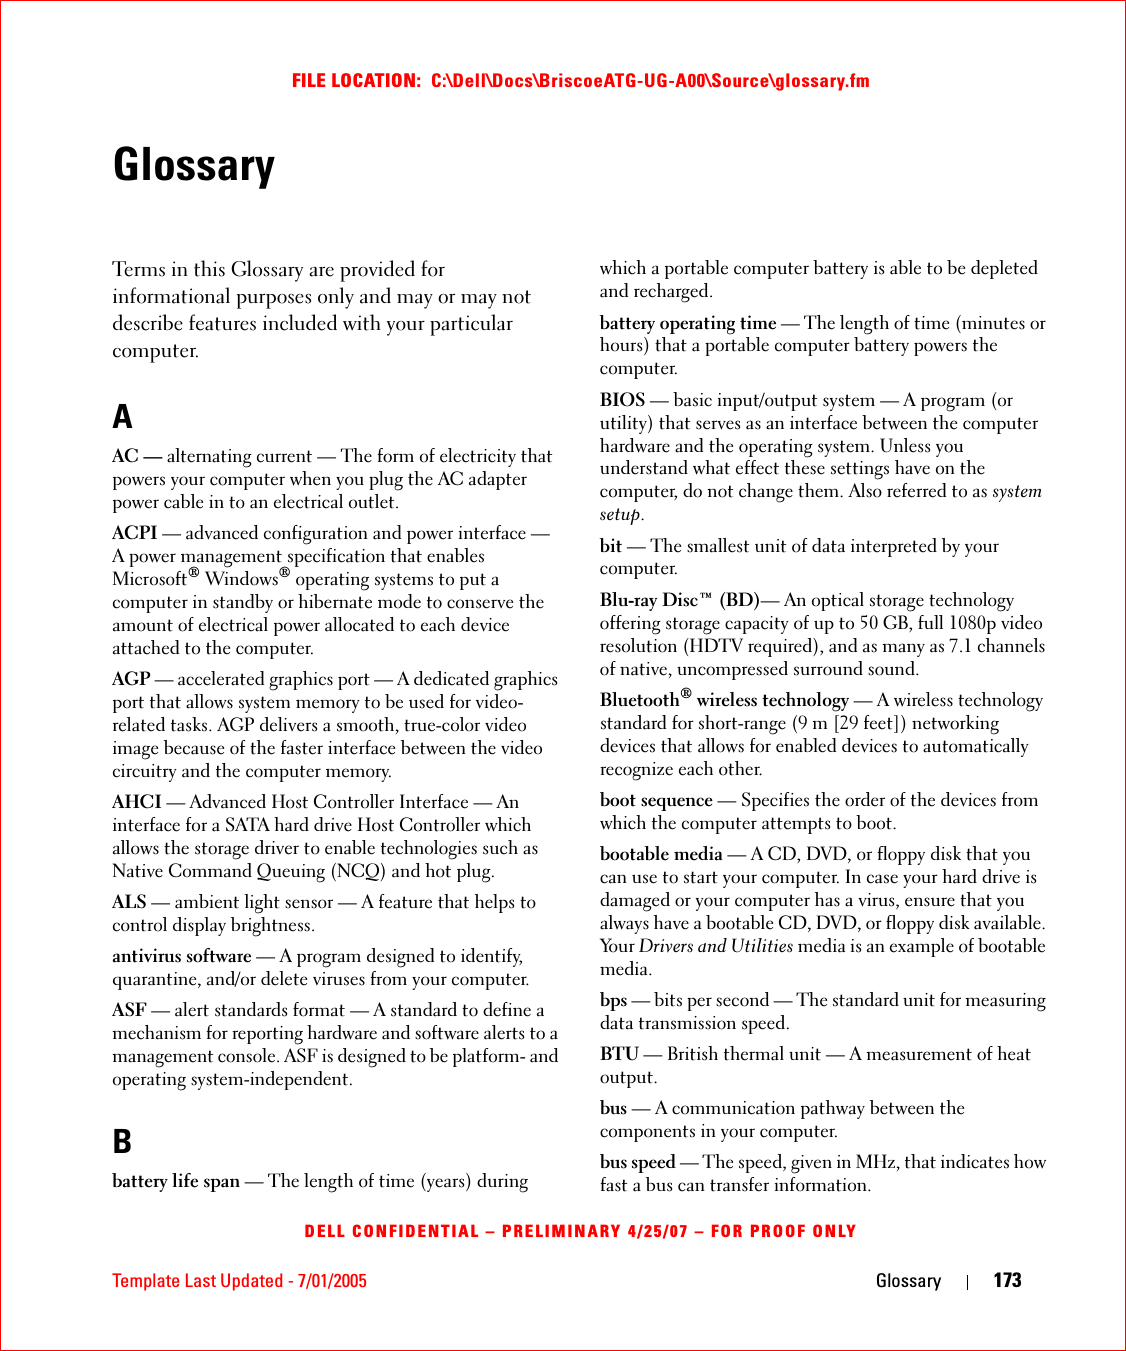 Template Last Updated - 7/01/2005 Glossary 173FILE LOCATION:  C:\Dell\Docs\BriscoeATG-UG-A00\Source\glossary.fmDELL CONFIDENTIAL – PRELIMINARY 4/25/07 – FOR PROOF ONLYGlossaryTerms in this Glossary are provided for informational purposes only and may or may not describe features included with your particular computer.AAC — alternating current — The form of electricity that powers your computer when you plug the AC adapter power cable in to an electrical outlet.ACPI — advanced configuration and power interface — A power management specification that enables Microsoft® Windows® operating systems to put a computer in standby or hibernate mode to conserve the amount of electrical power allocated to each device attached to the computer.AGP — accelerated graphics port — A dedicated graphics port that allows system memory to be used for video-related tasks. AGP delivers a smooth, true-color video image because of the faster interface between the video circuitry and the computer memory.AHCI — Advanced Host Controller Interface — An interface for a SATA hard drive Host Controller which allows the storage driver to enable technologies such as Native Command Queuing (NCQ) and hot plug.ALS — ambient light sensor — A feature that helps to control display brightness.antivirus software — A program designed to identify, quarantine, and/or delete viruses from your computer.ASF — alert standards format — A standard to define a mechanism for reporting hardware and software alerts to a management console. ASF is designed to be platform- and operating system-independent.Bbattery life span — The length of time (years) during which a portable computer battery is able to be depleted and recharged.battery operating time — The length of time (minutes or hours) that a portable computer battery powers the computer.BIOS — basic input/output system — A program (or utility) that serves as an interface between the computer hardware and the operating system. Unless you understand what effect these settings have on the computer, do not change them. Also referred to as system setup.bit — The smallest unit of data interpreted by your computer.Blu-ray Disc™ (BD)— An optical storage technology offering storage capacity of up to 50 GB, full 1080p video resolution (HDTV required), and as many as 7.1 channels of native, uncompressed surround sound.Bluetooth® wireless technology — A wireless technology standard for short-range (9 m [29 feet]) networking devices that allows for enabled devices to automatically recognize each other.boot sequence — Specifies the order of the devices from which the computer attempts to boot.bootable media — A CD, DVD, or floppy disk that you can use to start your computer. In case your hard drive is damaged or your computer has a virus, ensure that you always have a bootable CD, DVD, or floppy disk available. Yo u r   Drivers and Utilities media is an example of bootable media.bps — bits per second — The standard unit for measuring data transmission speed.BTU — British thermal unit — A measurement of heat output.bus — A communication pathway between the components in your computer.bus speed — The speed, given in MHz, that indicates how fast a bus can transfer information.